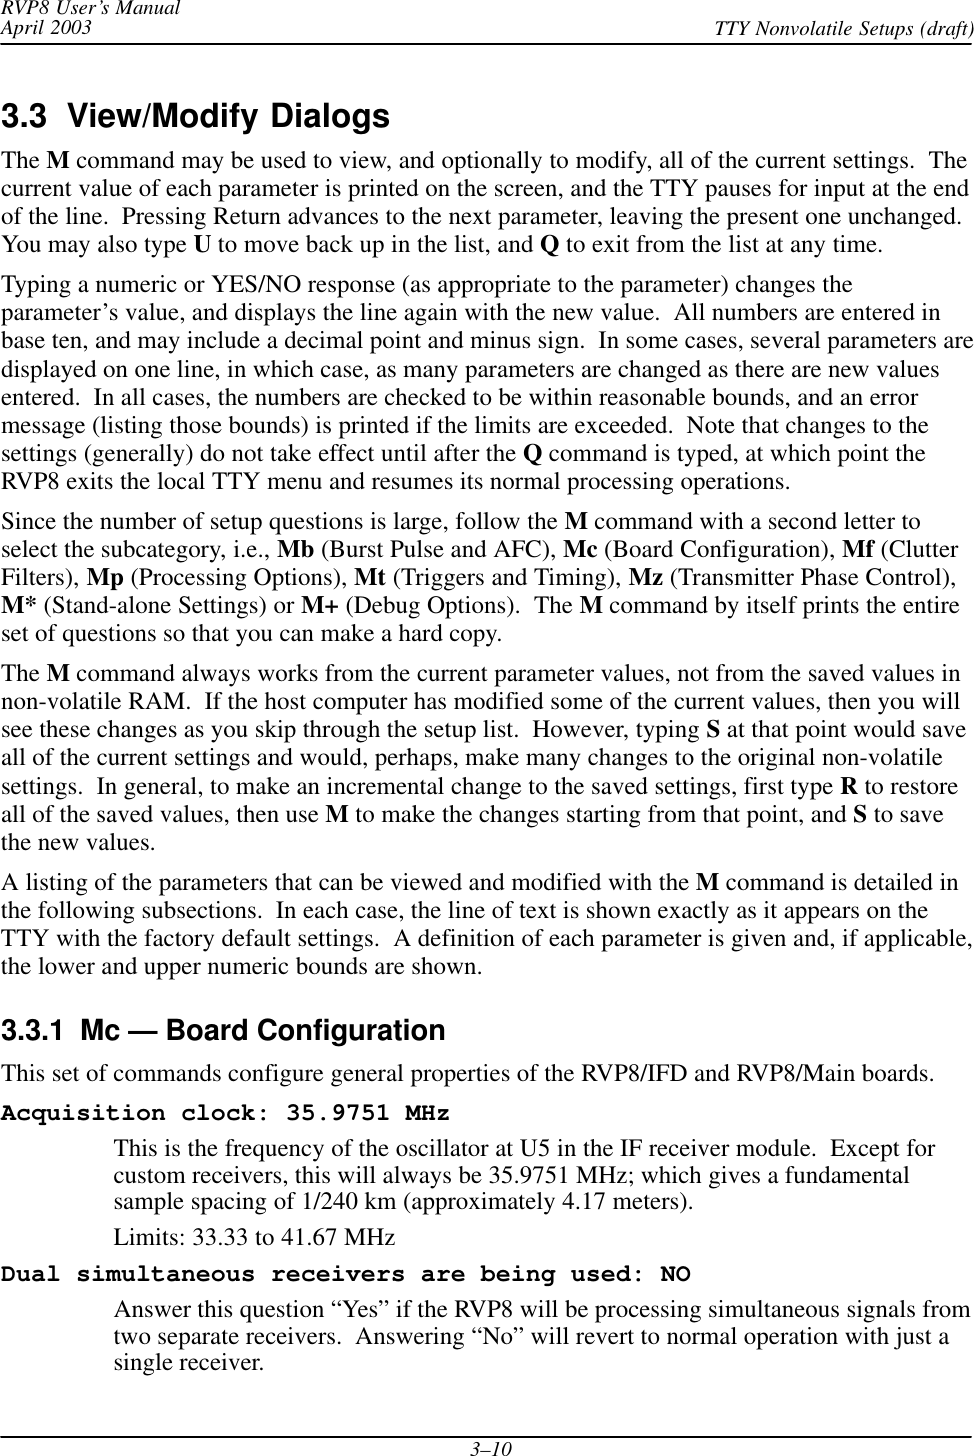 RVP8 User’s ManualApril 2003 TTY Nonvolatile Setups (draft)3–103.3  View/Modify DialogsThe M command may be used to view, and optionally to modify, all of the current settings.  Thecurrent value of each parameter is printed on the screen, and the TTY pauses for input at the endof the line.  Pressing Return advances to the next parameter, leaving the present one unchanged.You may also type U to move back up in the list, and Q to exit from the list at any time.Typing a numeric or YES/NO response (as appropriate to the parameter) changes theparameter’s value, and displays the line again with the new value.  All numbers are entered inbase ten, and may include a decimal point and minus sign.  In some cases, several parameters aredisplayed on one line, in which case, as many parameters are changed as there are new valuesentered.  In all cases, the numbers are checked to be within reasonable bounds, and an errormessage (listing those bounds) is printed if the limits are exceeded.  Note that changes to thesettings (generally) do not take effect until after the Q command is typed, at which point theRVP8 exits the local TTY menu and resumes its normal processing operations.Since the number of setup questions is large, follow the M command with a second letter toselect the subcategory, i.e., Mb (Burst Pulse and AFC), Mc (Board Configuration), Mf (ClutterFilters), Mp (Processing Options), Mt (Triggers and Timing), Mz (Transmitter Phase Control),M* (Stand-alone Settings) or M+ (Debug Options).  The M command by itself prints the entireset of questions so that you can make a hard copy.The M command always works from the current parameter values, not from the saved values innon-volatile RAM.  If the host computer has modified some of the current values, then you willsee these changes as you skip through the setup list.  However, typing S at that point would saveall of the current settings and would, perhaps, make many changes to the original non-volatilesettings.  In general, to make an incremental change to the saved settings, first type R to restoreall of the saved values, then use M to make the changes starting from that point, and S to savethe new values.A listing of the parameters that can be viewed and modified with the M command is detailed inthe following subsections.  In each case, the line of text is shown exactly as it appears on theTTY with the factory default settings.  A definition of each parameter is given and, if applicable,the lower and upper numeric bounds are shown.3.3.1  Mc — Board ConfigurationThis set of commands configure general properties of the RVP8/IFD and RVP8/Main boards.Acquisition clock: 35.9751 MHzThis is the frequency of the oscillator at U5 in the IF receiver module.  Except forcustom receivers, this will always be 35.9751 MHz; which gives a fundamentalsample spacing of 1/240 km (approximately 4.17 meters).Limits: 33.33 to 41.67 MHzDual simultaneous receivers are being used: NOAnswer this question “Yes” if the RVP8 will be processing simultaneous signals fromtwo separate receivers.  Answering “No” will revert to normal operation with just asingle receiver.